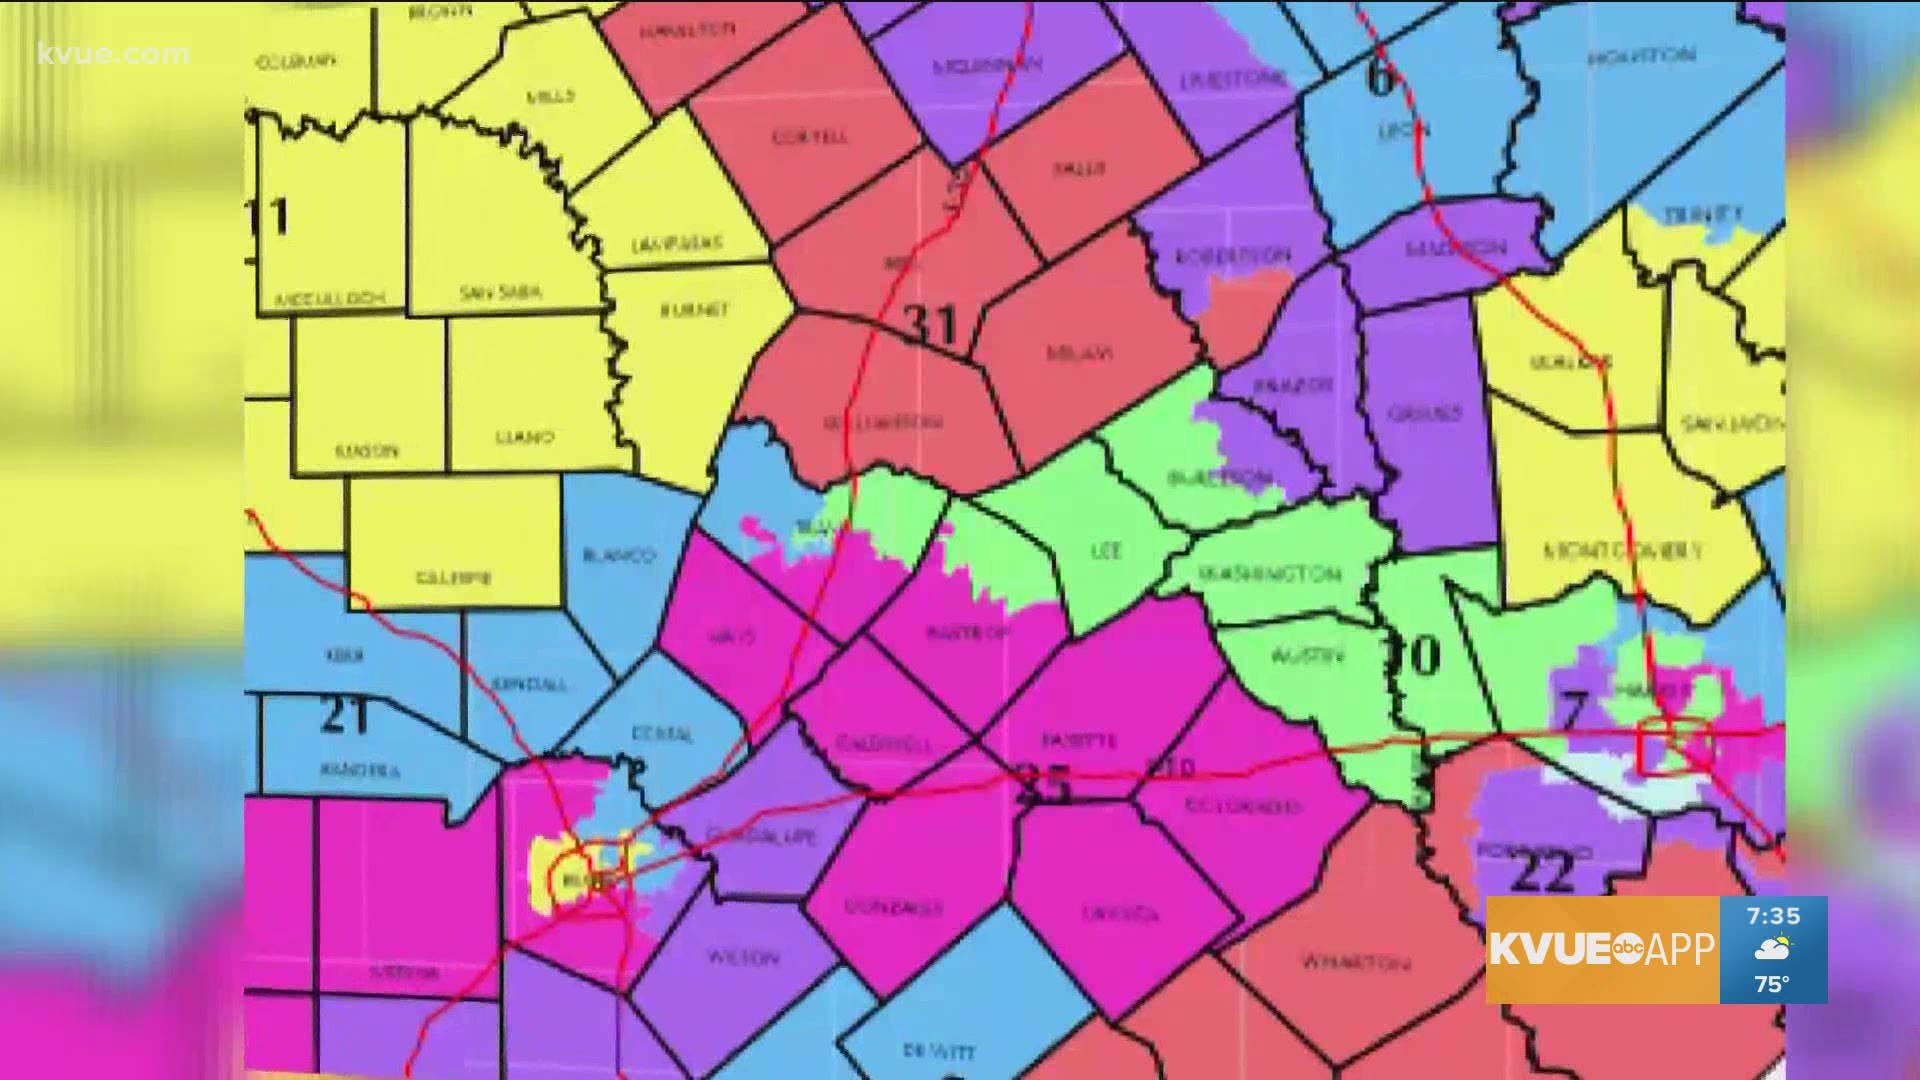 Austinites have a chance to share their concerns about how their neighborhood is districted.